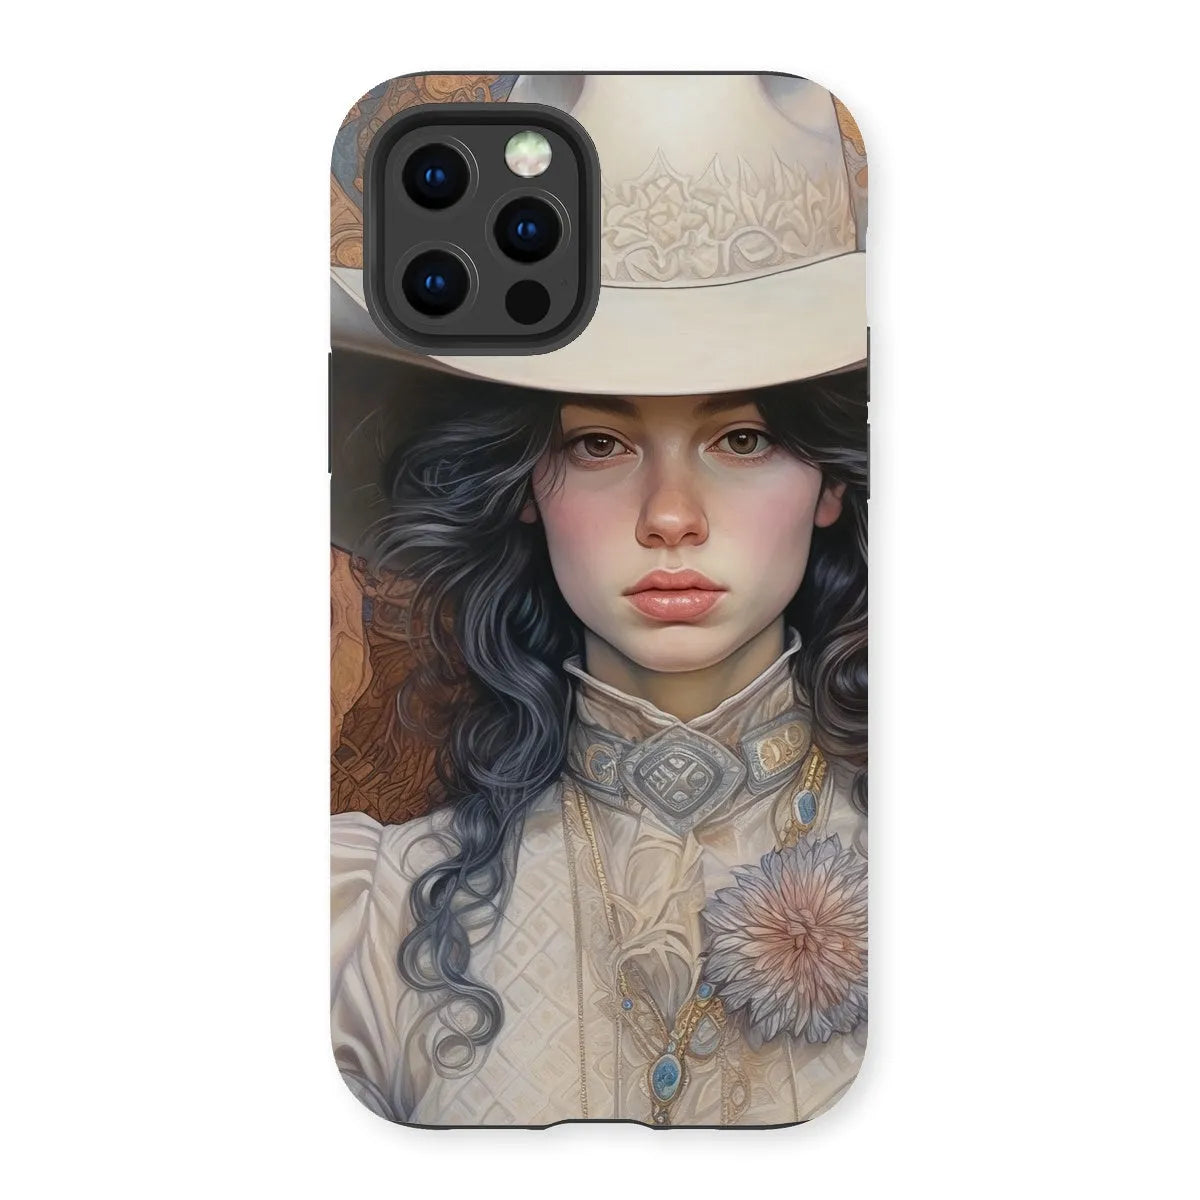 Helena The Lesbian Cowgirl - Sapphic Art Phone Case - Iphone 13 Pro / Matte - Mobile Phone Cases - Aesthetic Art